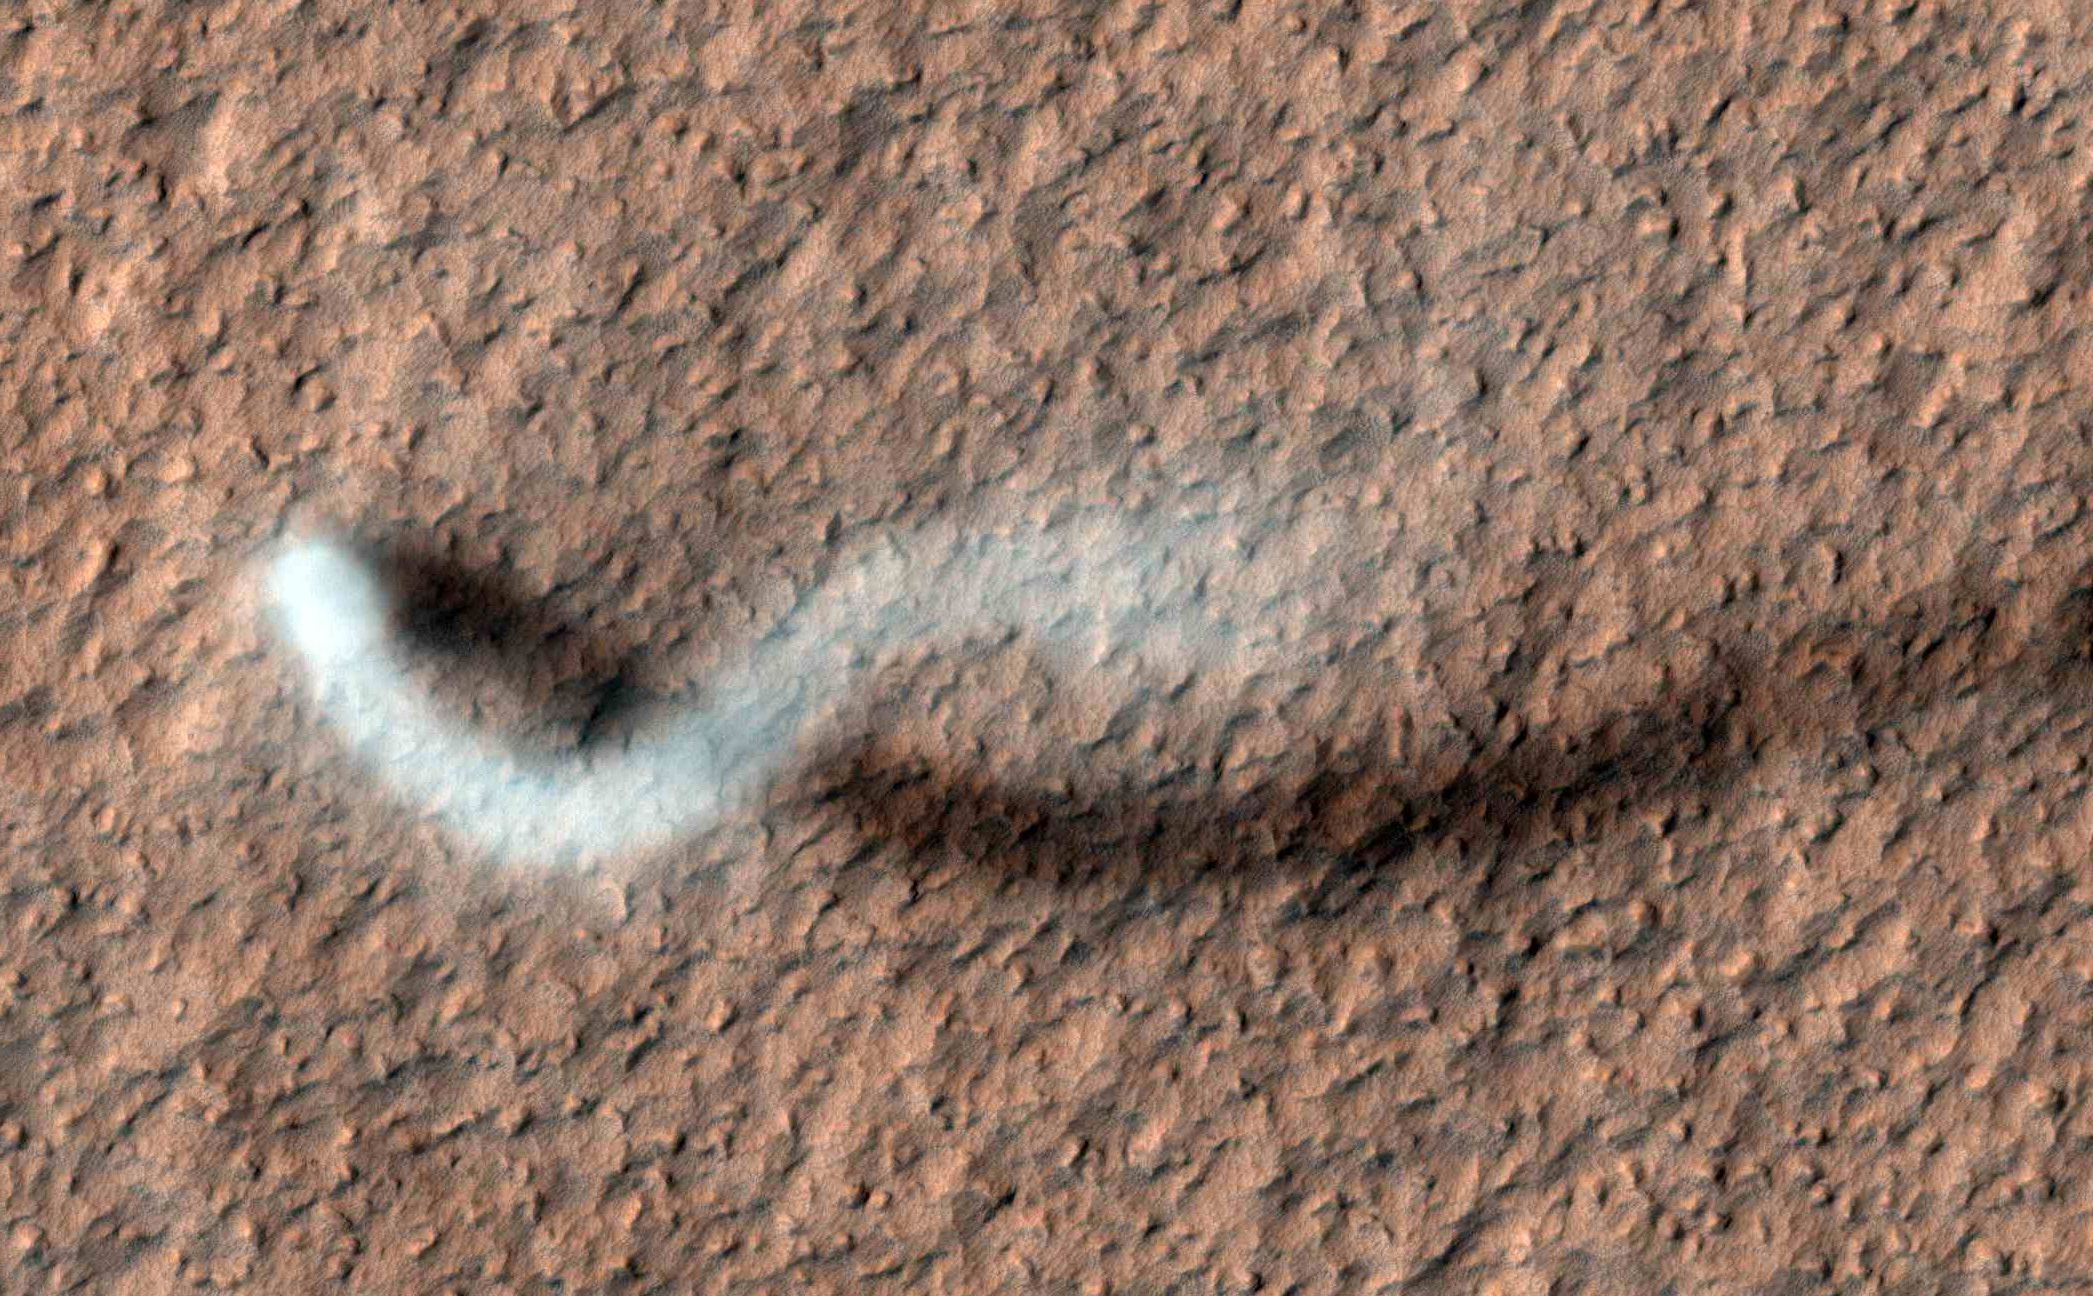 A towering dust devil, casts a serpentine shadow over the Martian surface in this image acquired by the High Resolution Imaging Science Experiment (HiRISE) camera on NASA's Mars Reconnaissance Orbiter.